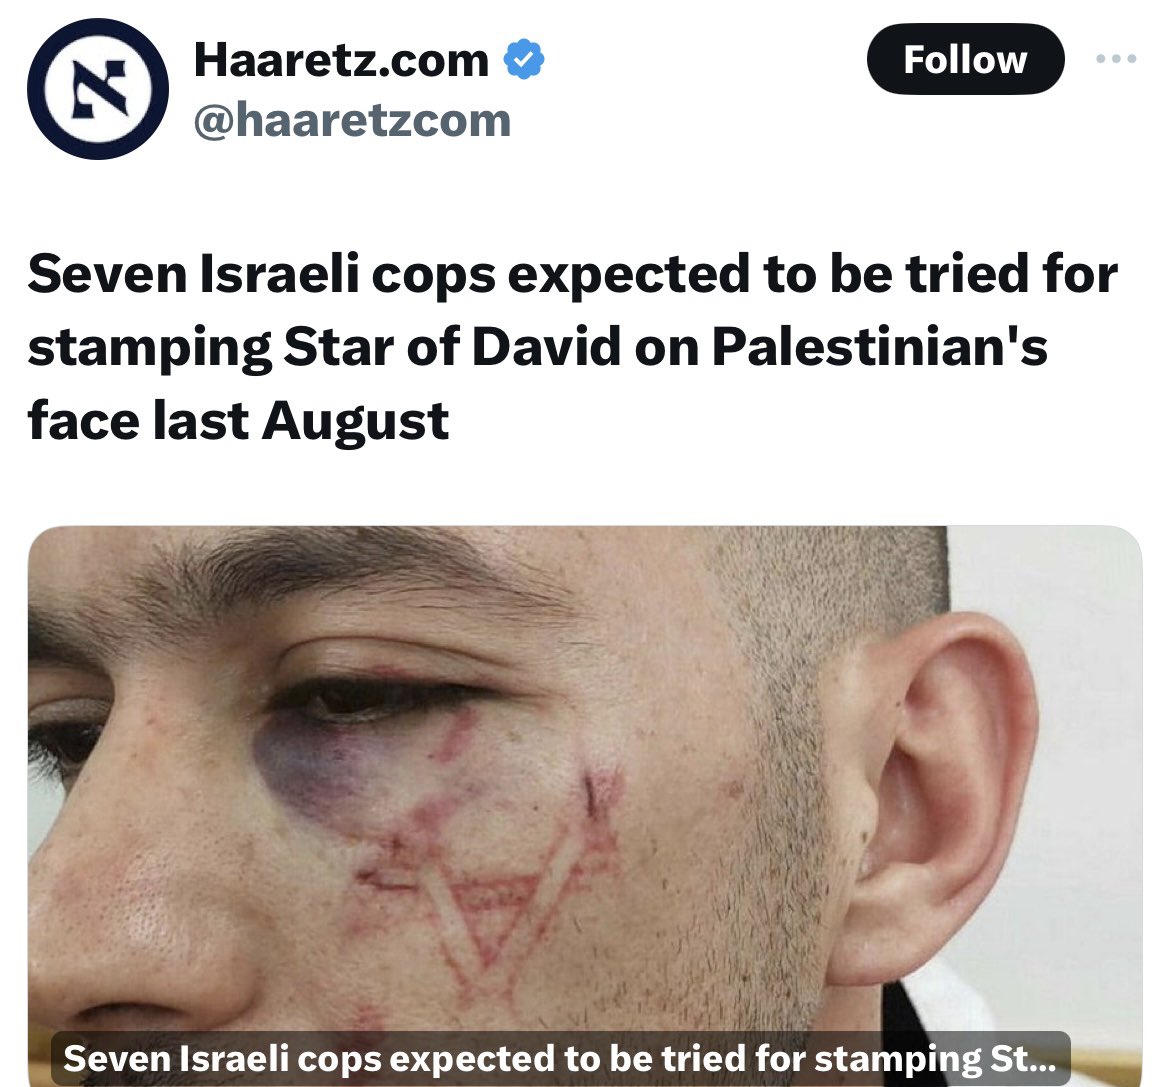 Seven soldiers burnt a star of David in a Palestinian face This was before October 7th in an area where Hamas doesn't exist They Have to choose between living as slaves or raising an armed resistance Which would you choose?